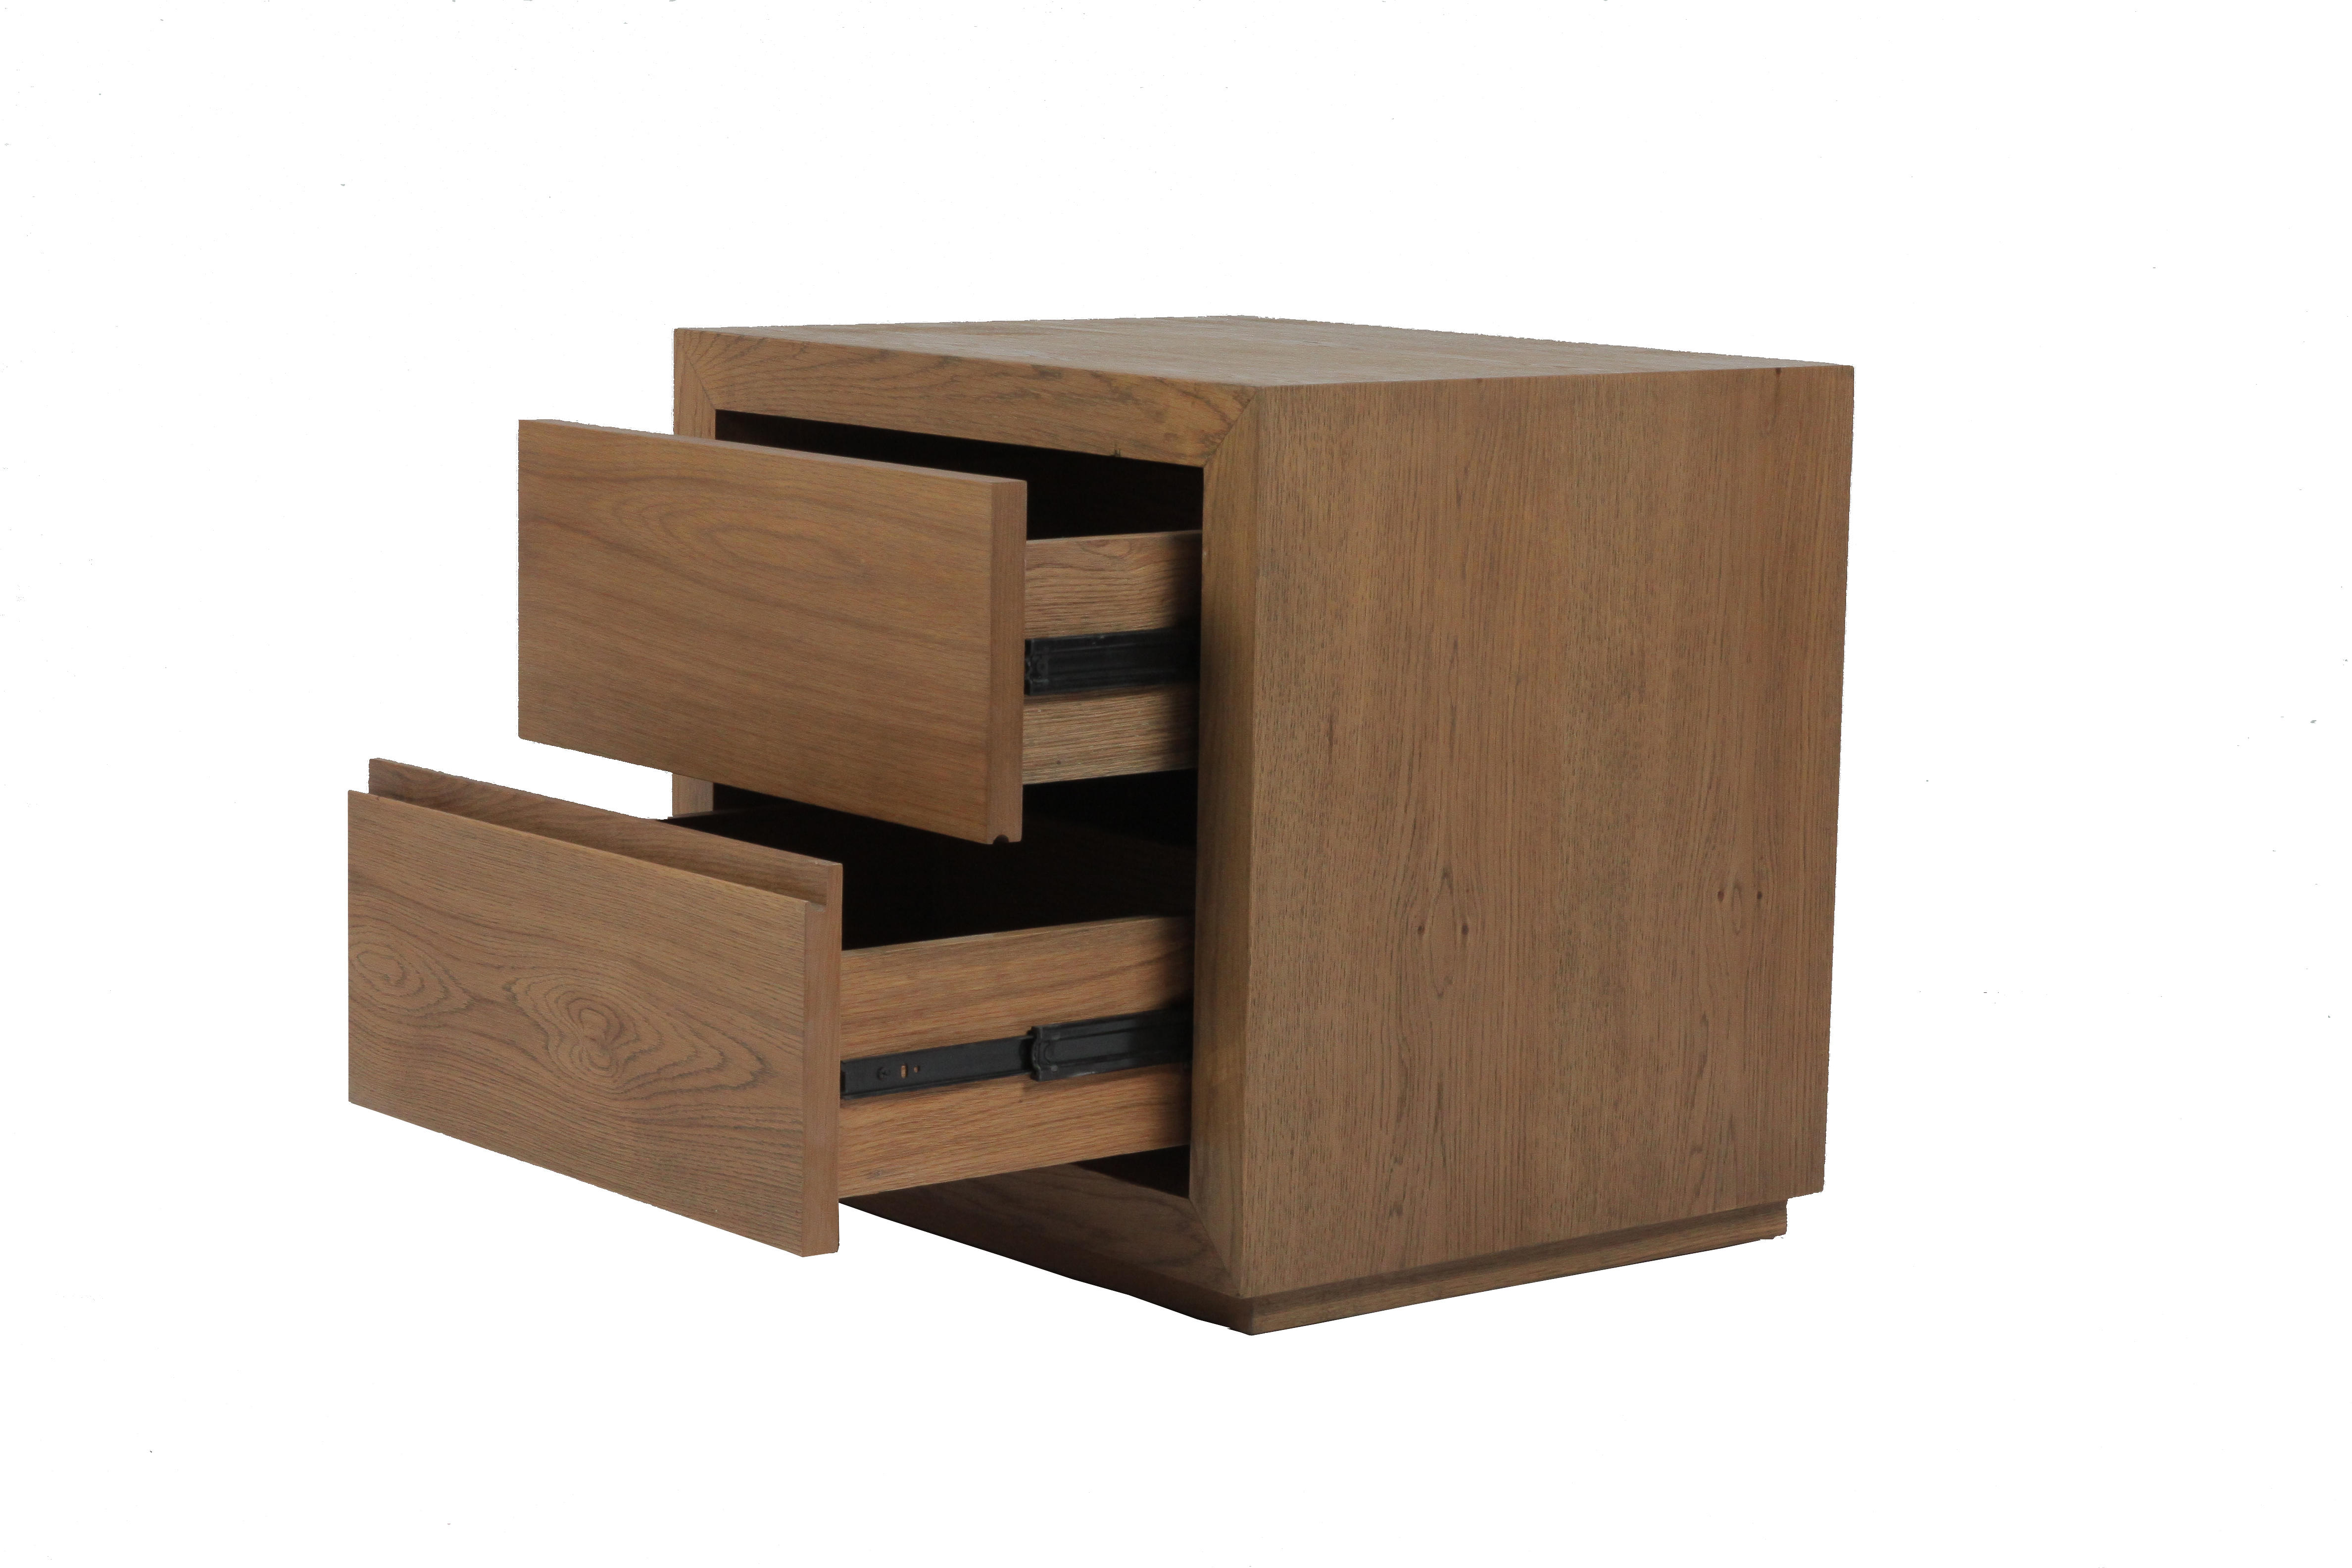 RNT-0936 Campaign Simplism Design Nightstand With 2 Drawers